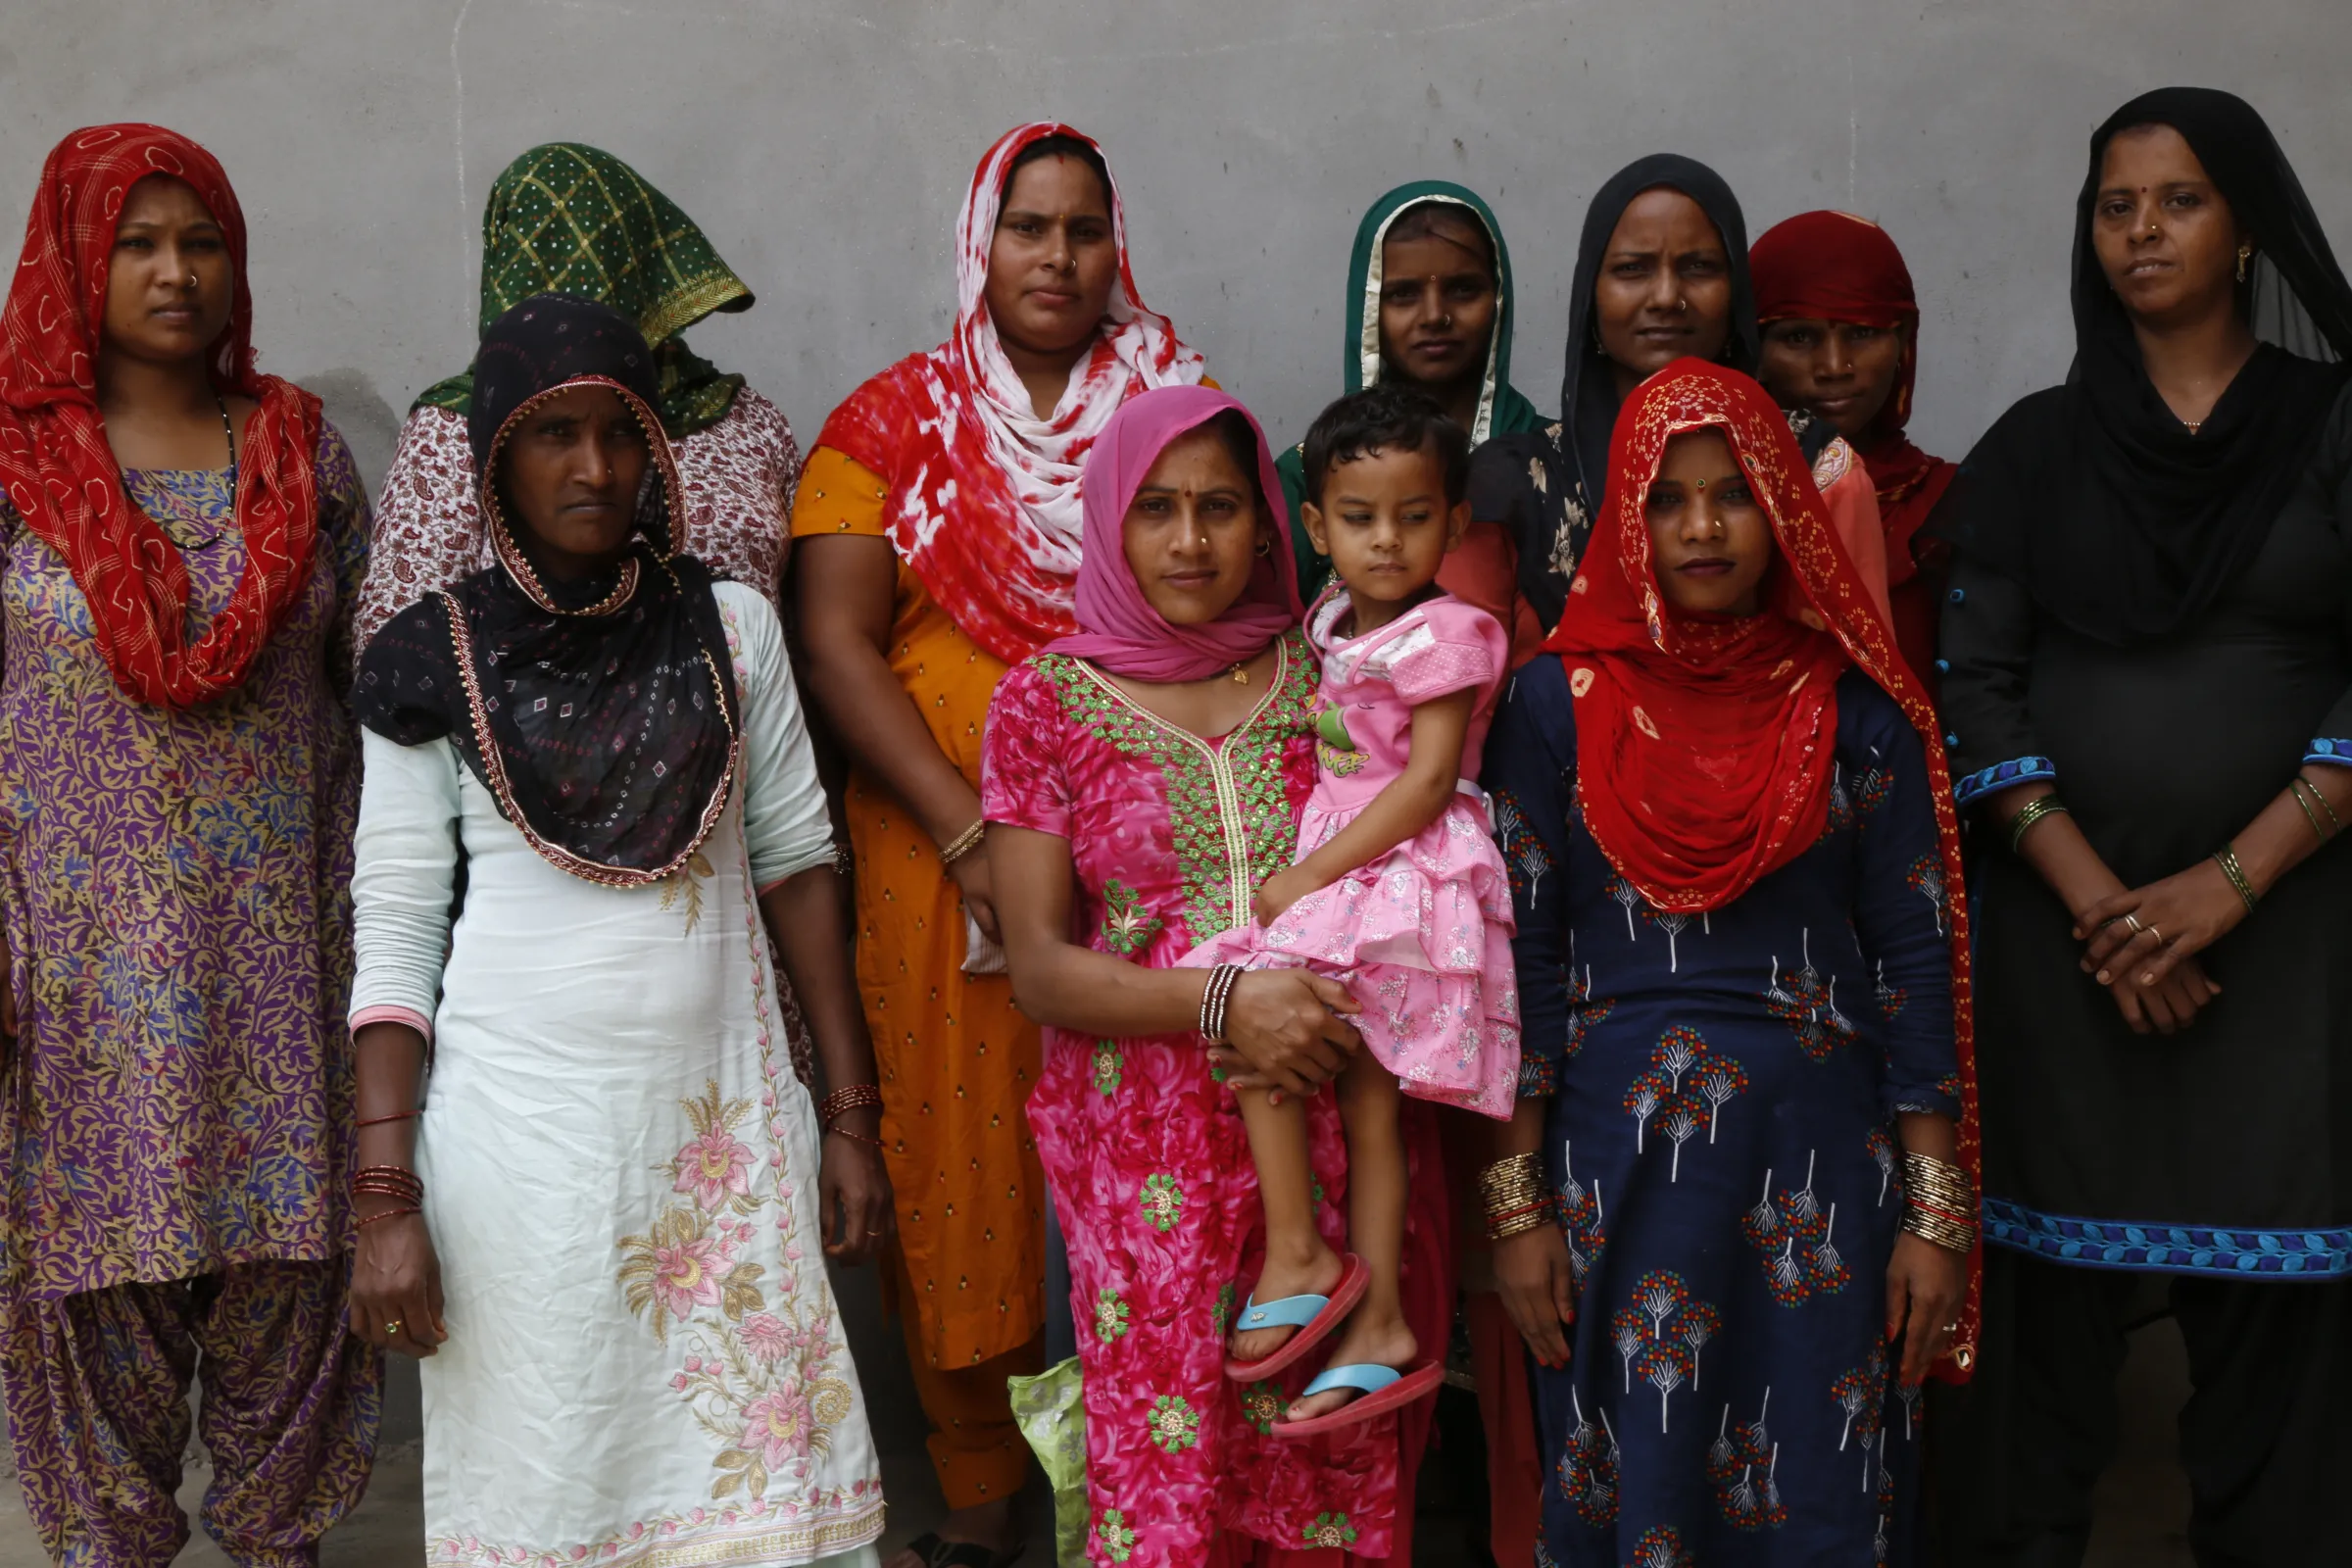 A woman holds a child in a group of trafficked brides posing for a photo in a village in Hisar, India, July 31, 2022. Thomson Reuters Foundation/Annie Banerji